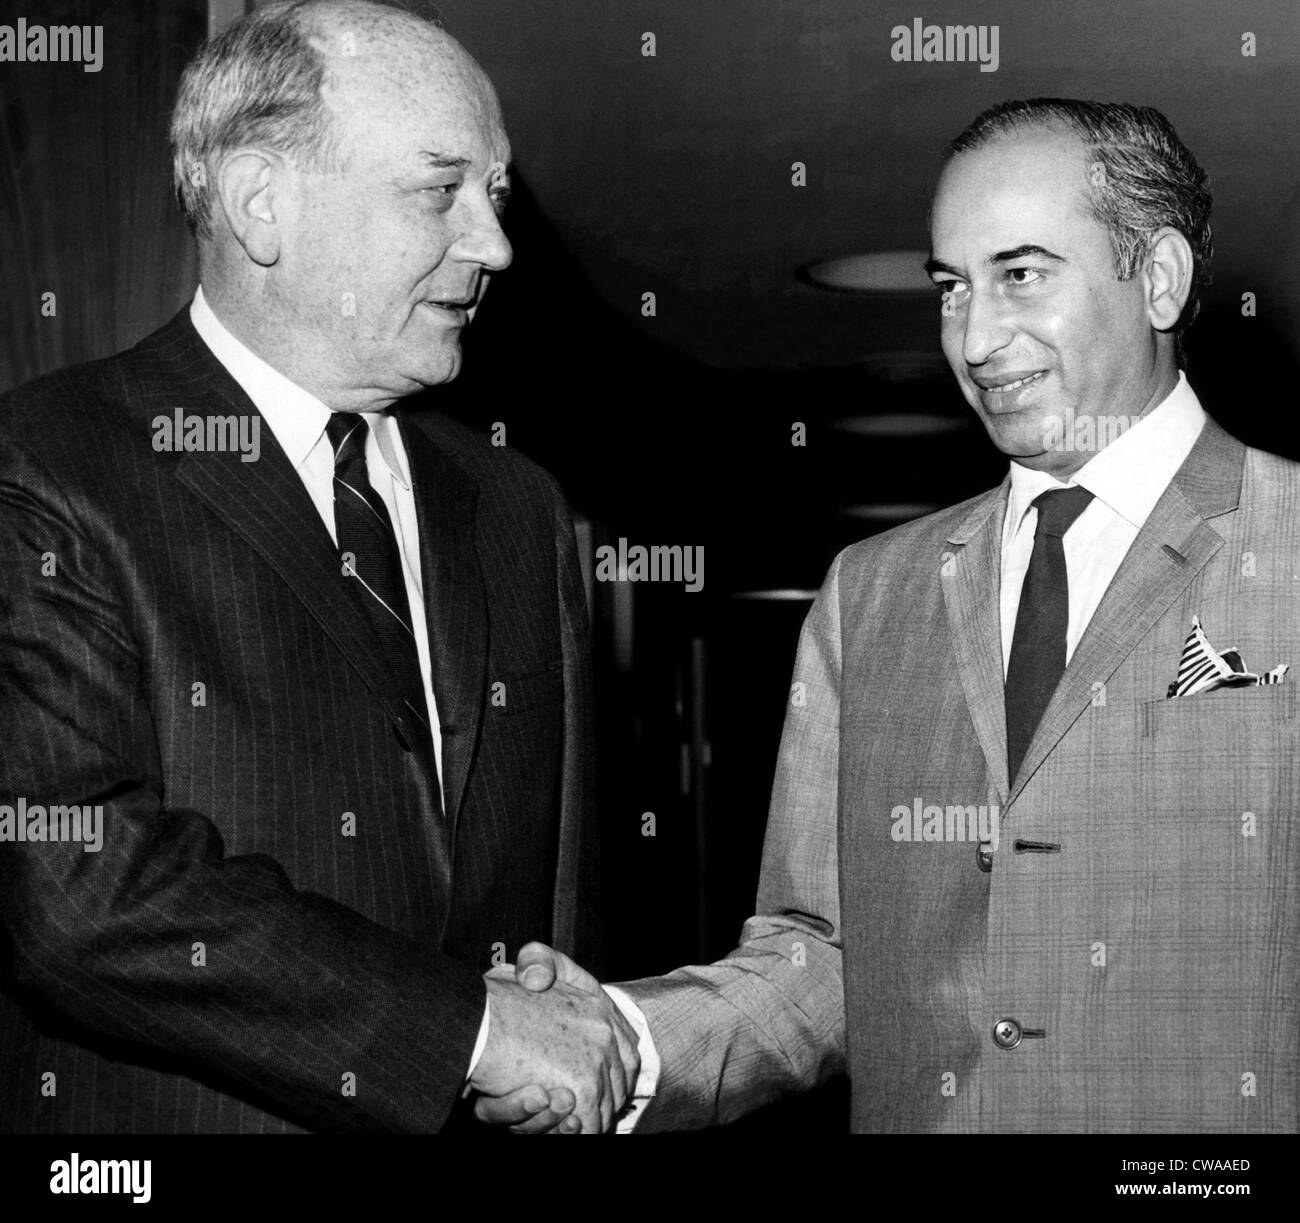 Secretary of State Dean Rusk welcomes Pakistani Foreign Minister Zulfikar Ali Bhutto to the U.N. headquarters in New York, Stock Photo